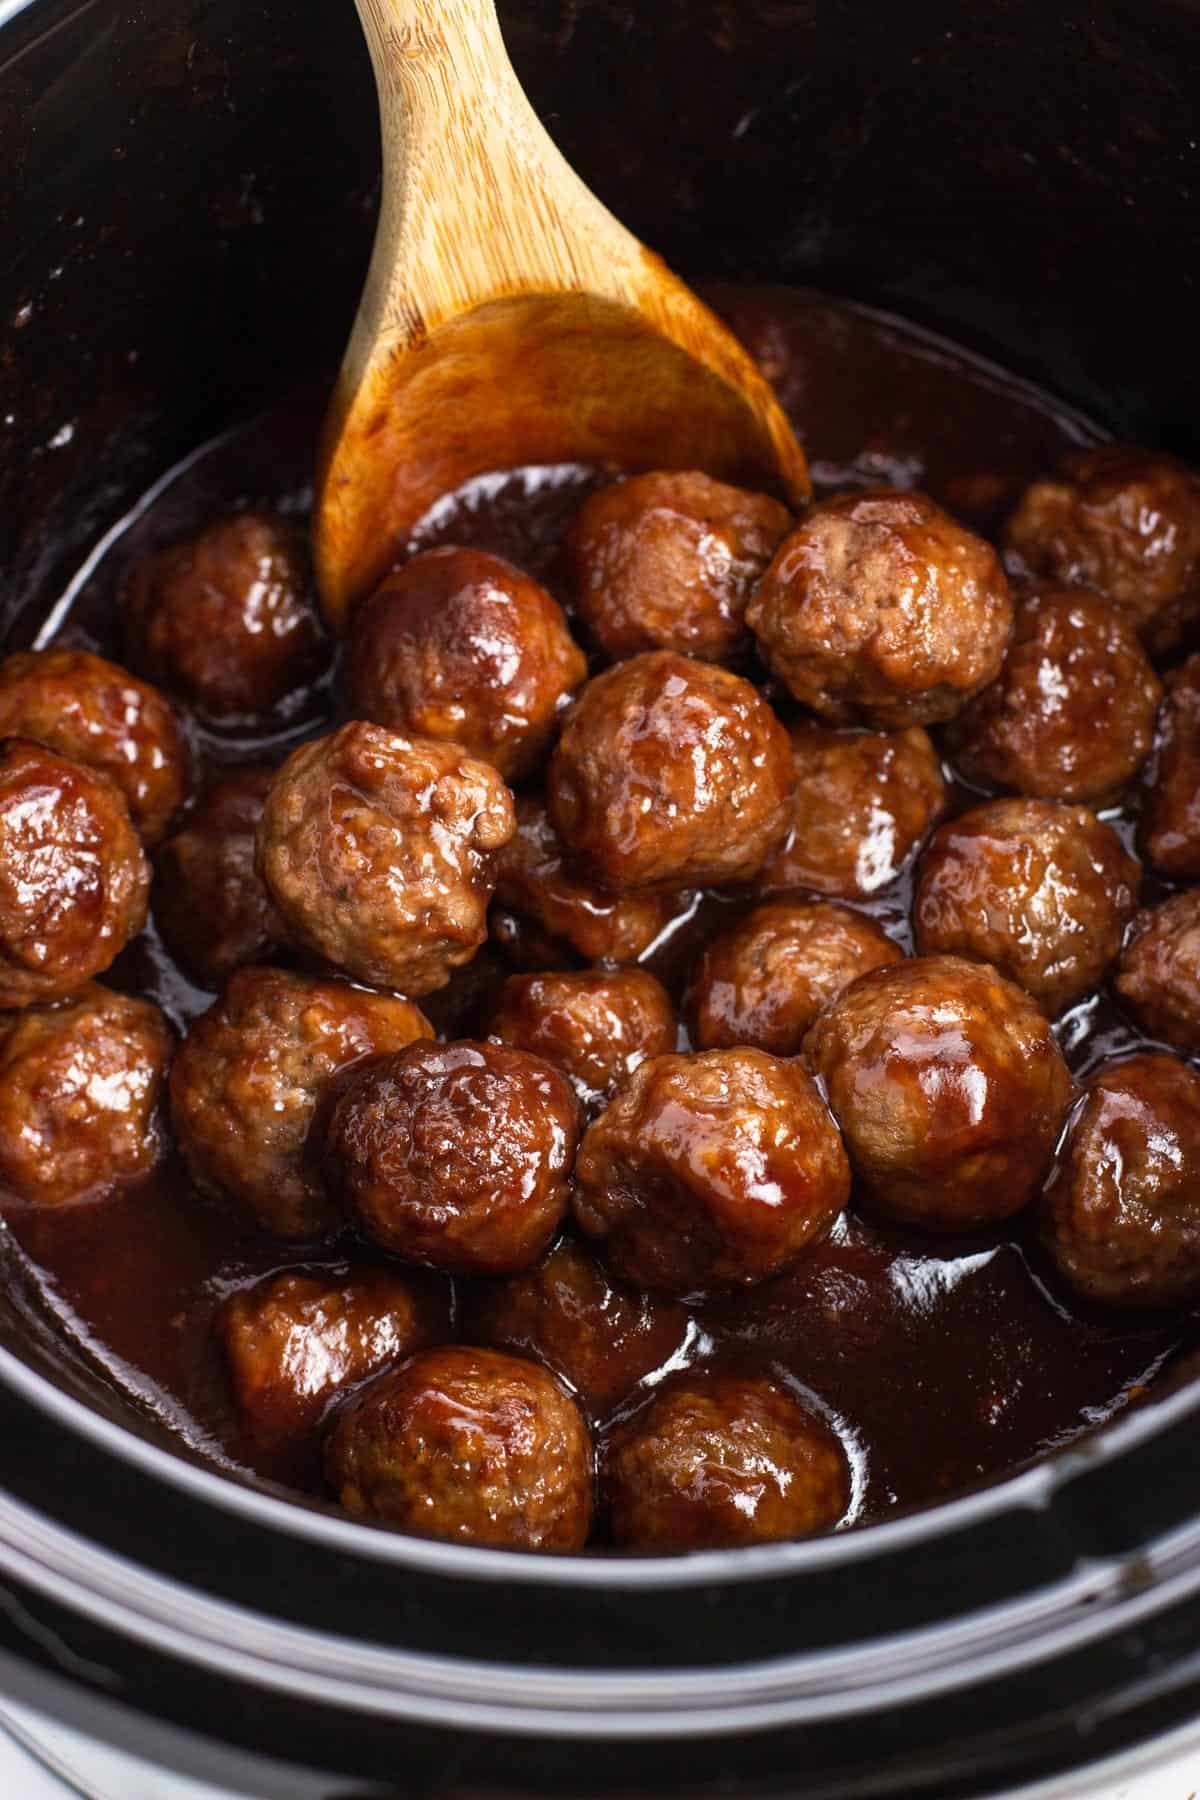 Sauce-coated meatballs in a slow cooker with a wooden spoon.